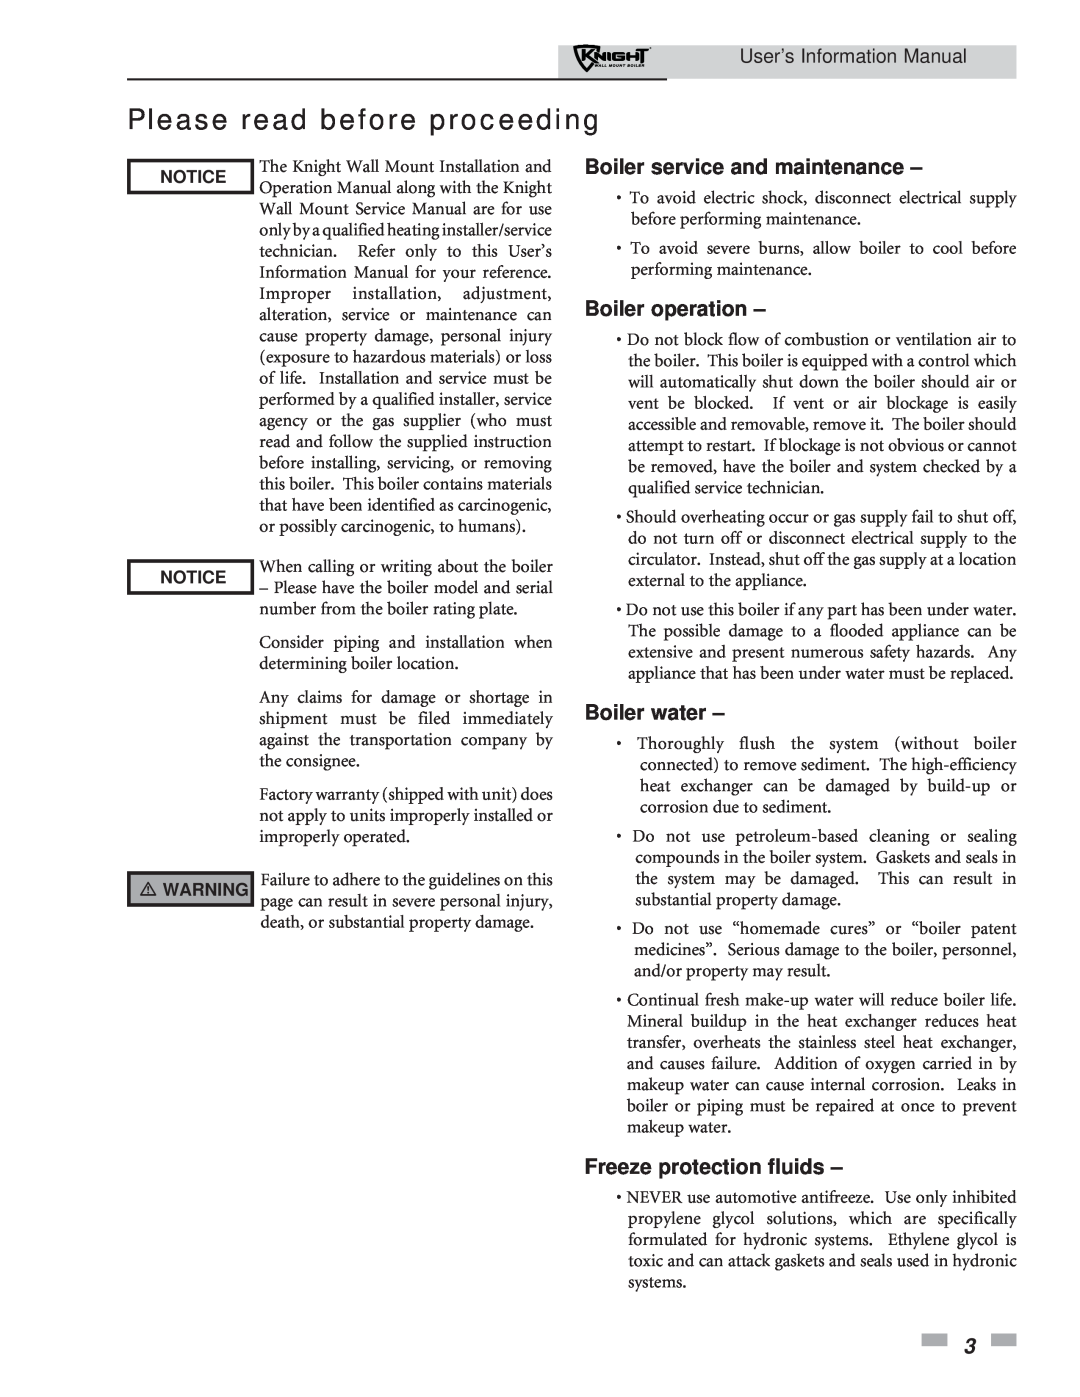 Lochinvar 51 - 211 manual Please read before proceeding, Boiler service and maintenance, Boiler operation, Boiler water 